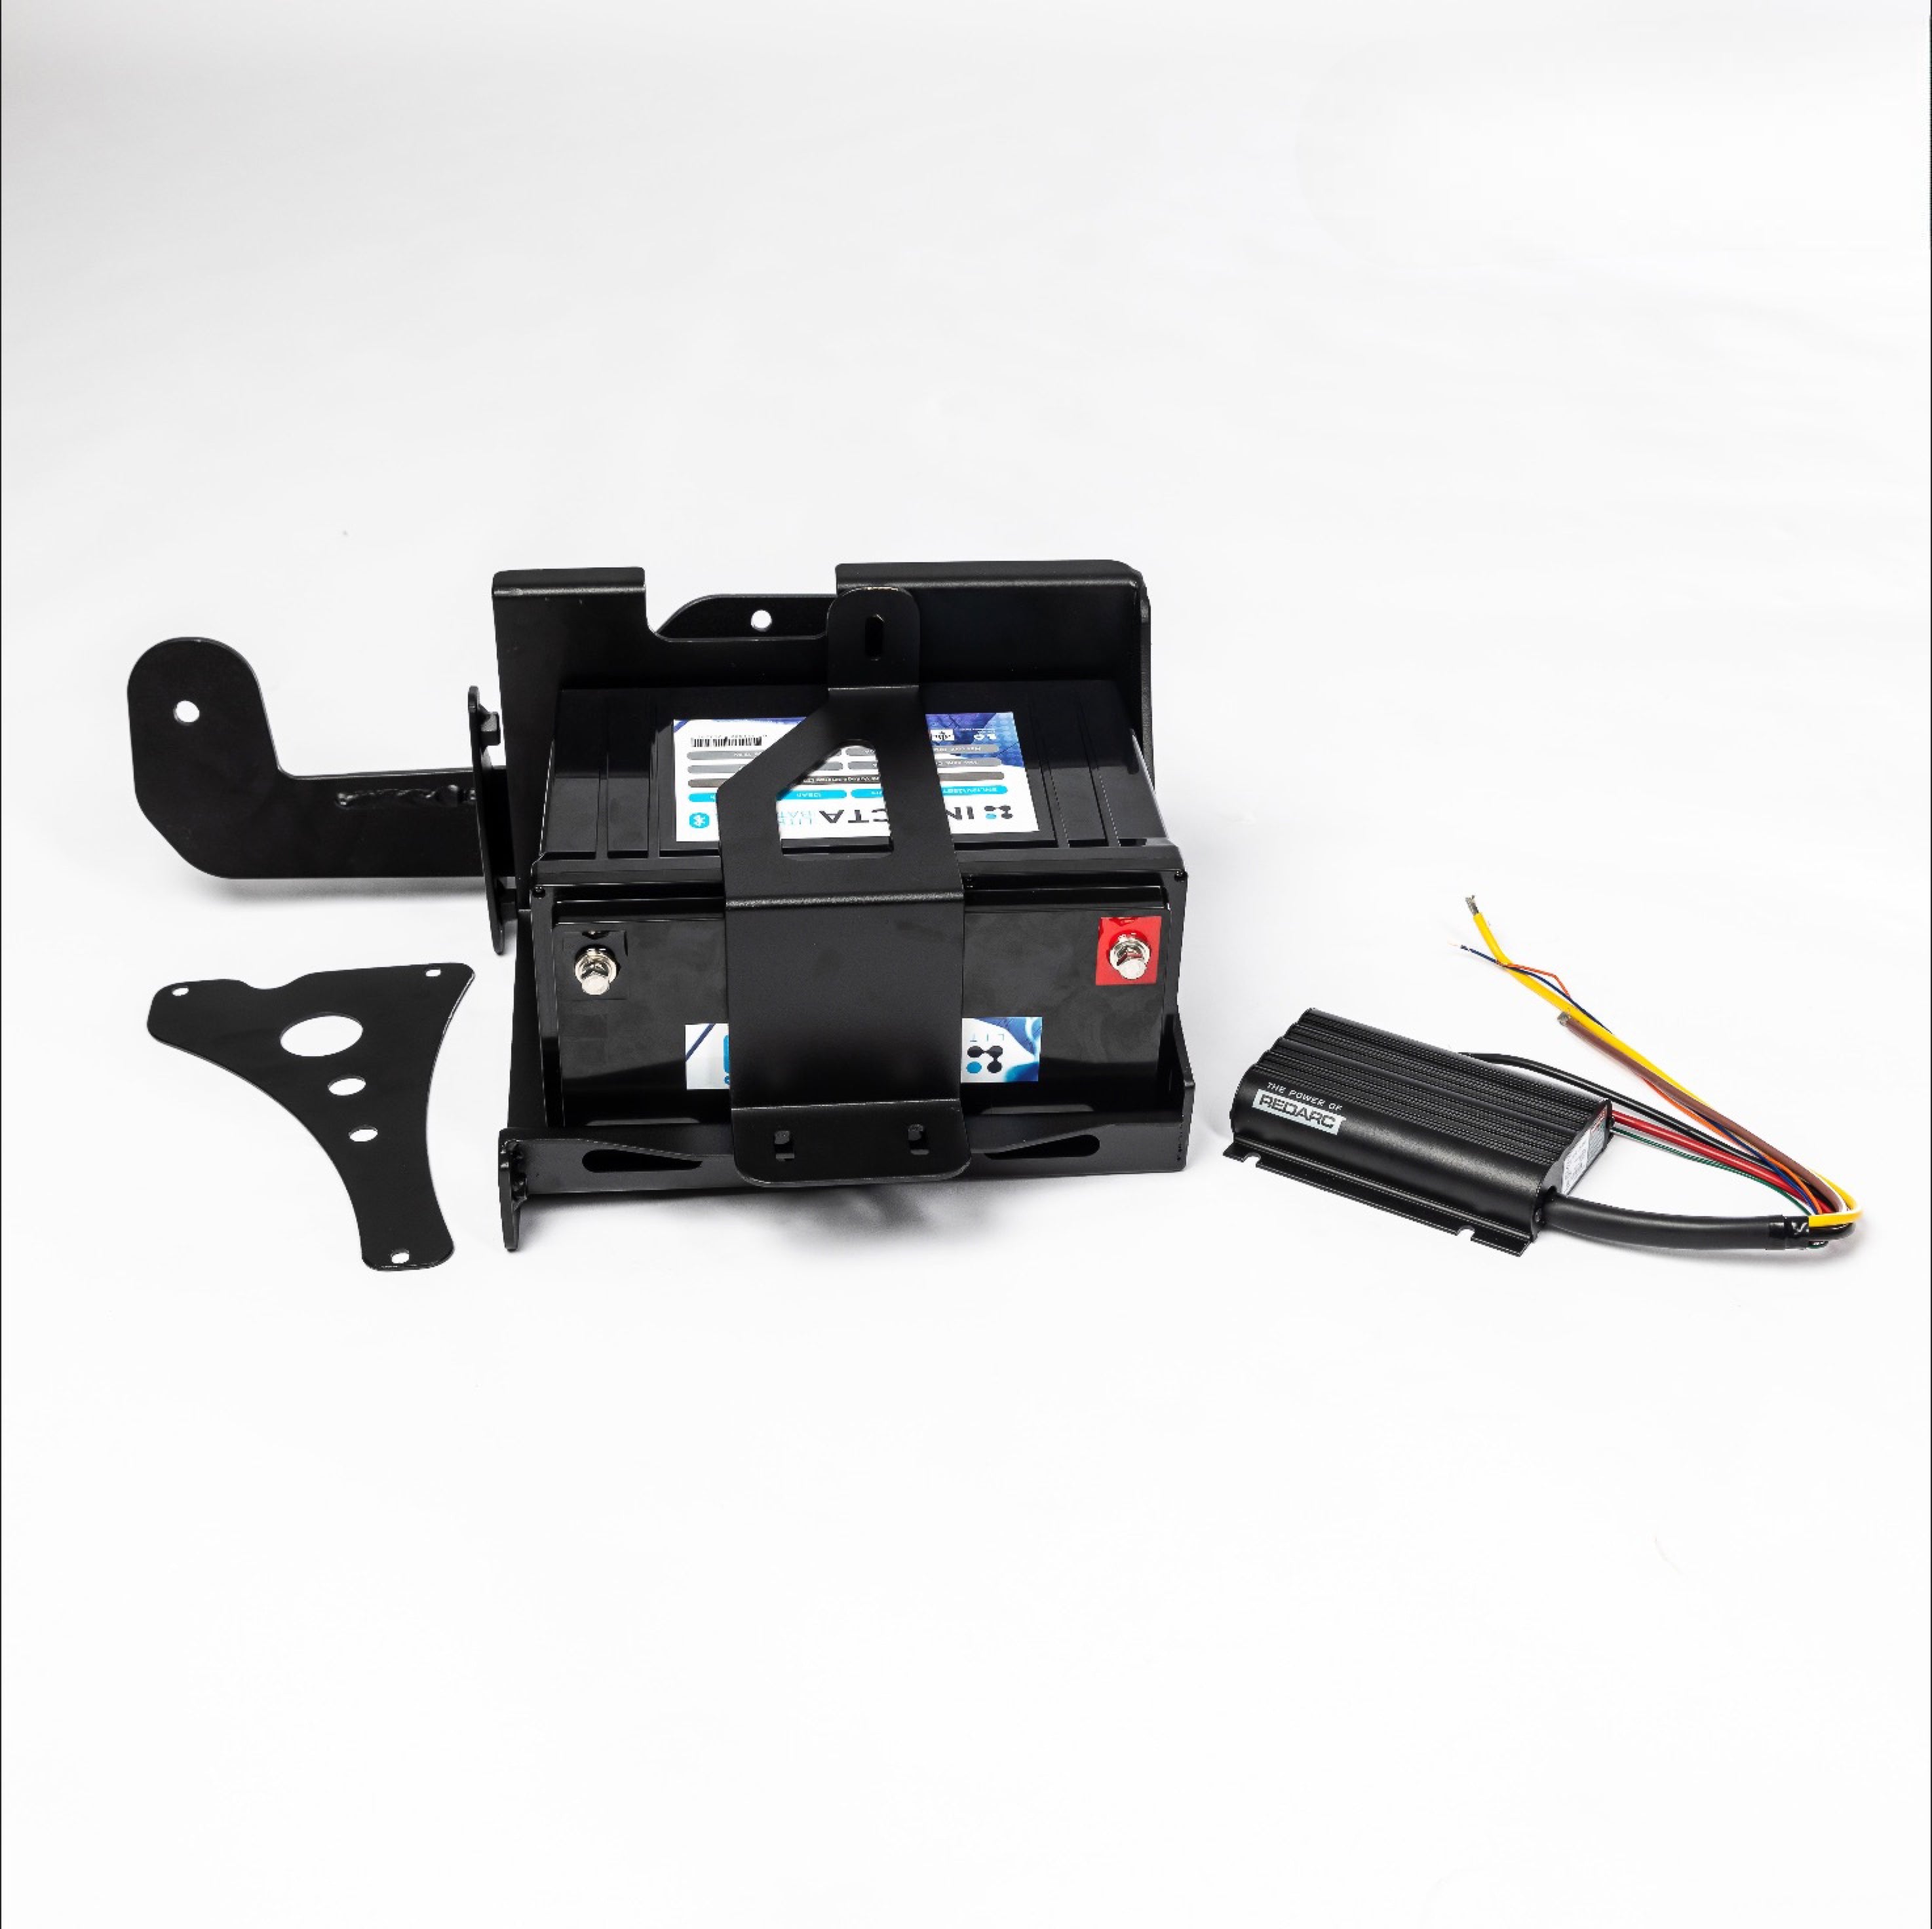 Ram 1500 DT Auxiliary Battery System - Outback Kitters